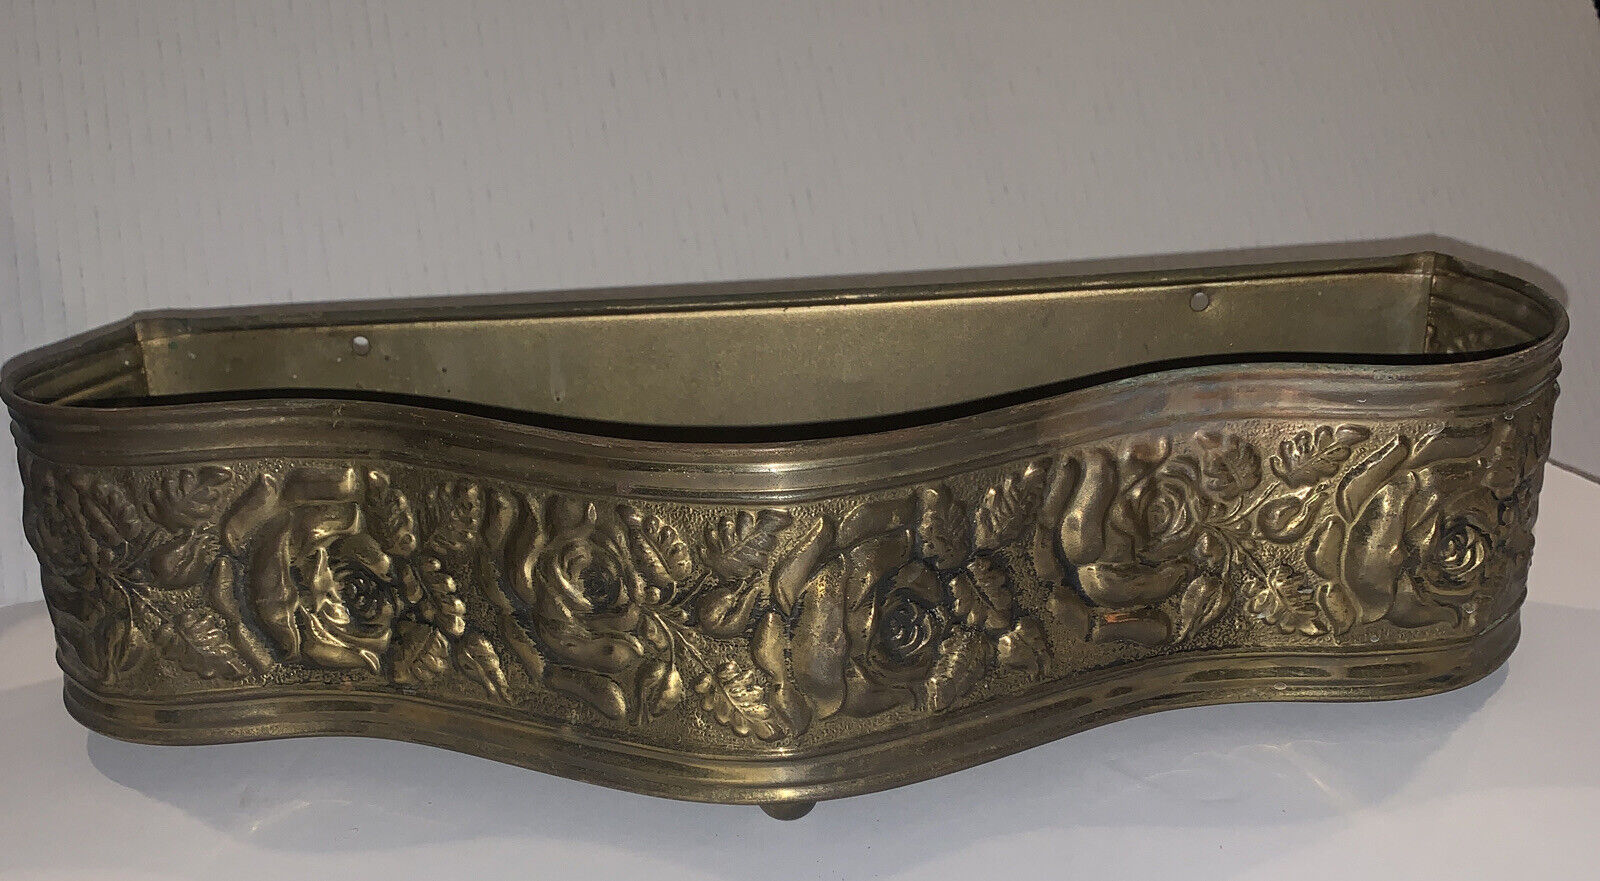 Antique  Brass Embossed Floral Planter Tray Bowl Footed England Ornate